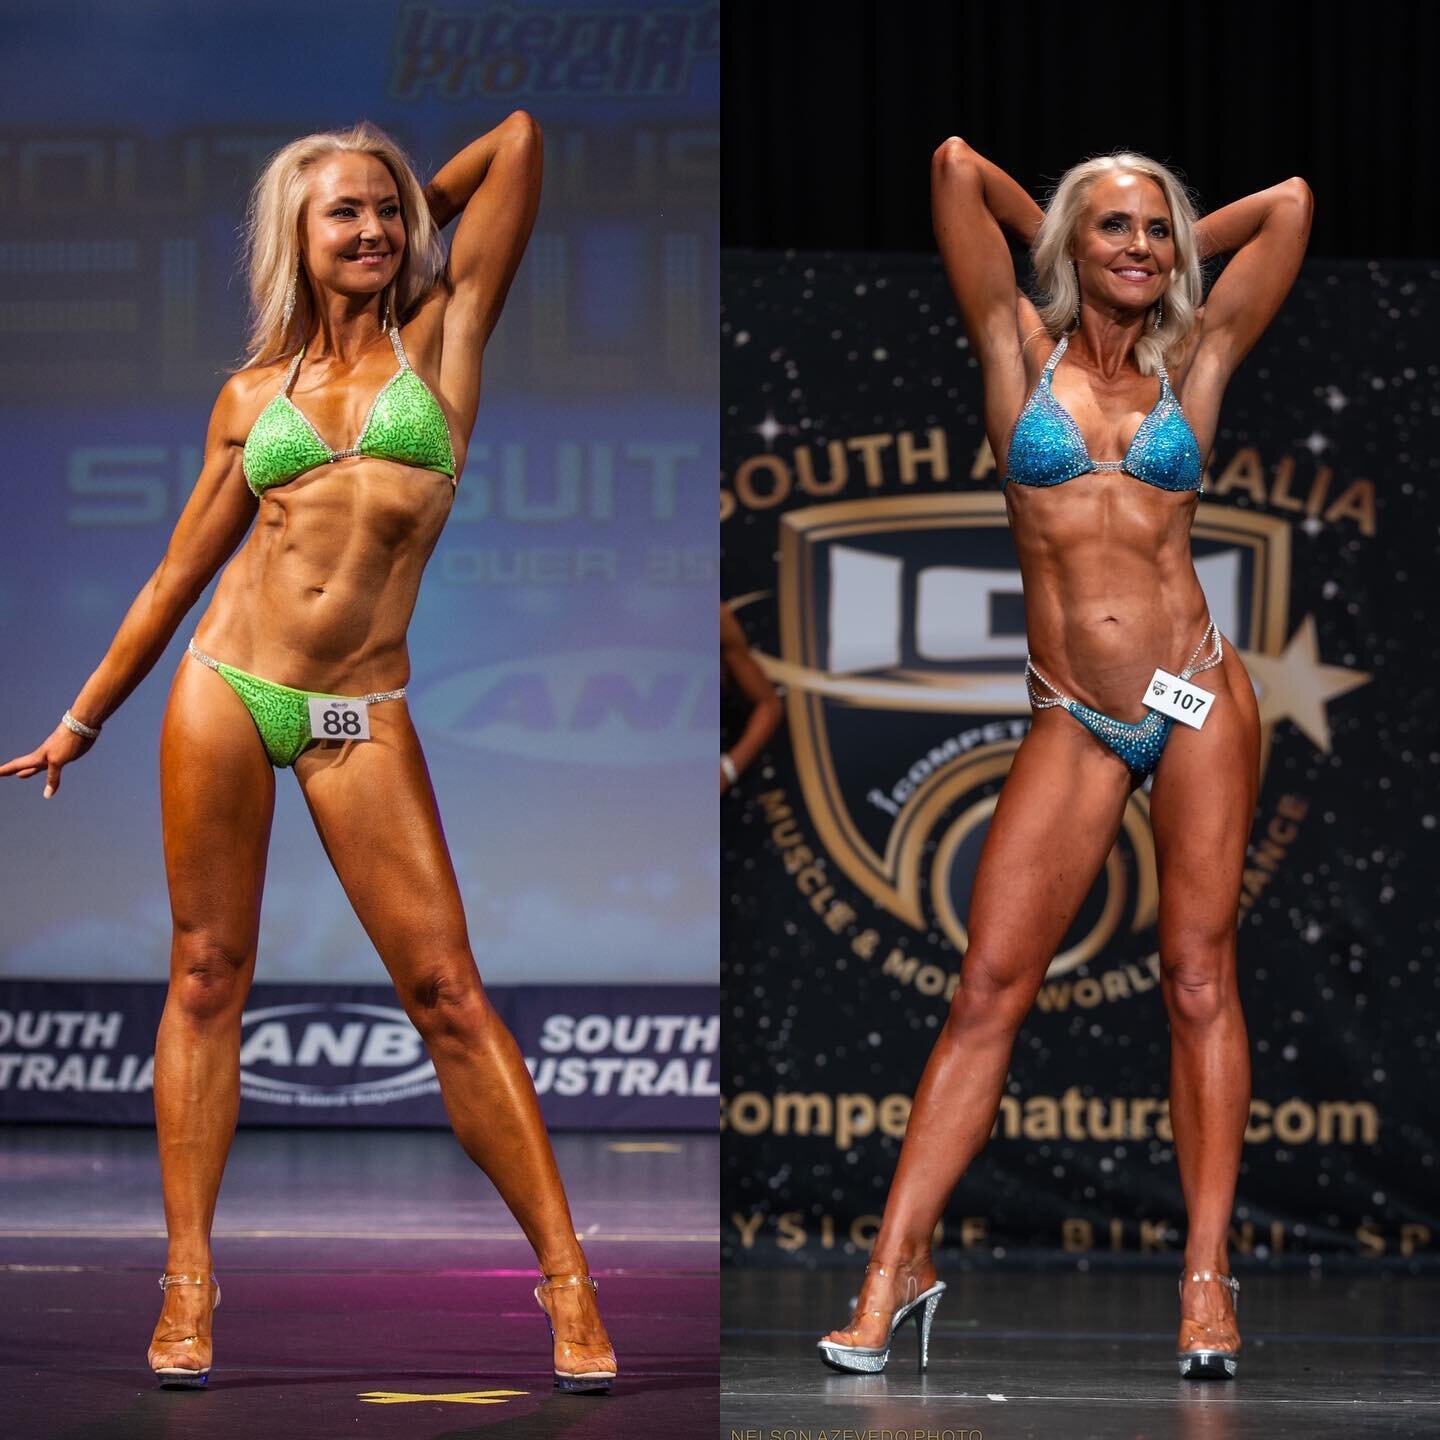 7 years difference and about the same weight. I think I am a kilo lighter now on stage.
 
So more muscle now for sure which is great considering my recent injury :-)
I get sorer than I used to after training&hellip; or more fatigued actually, but alw